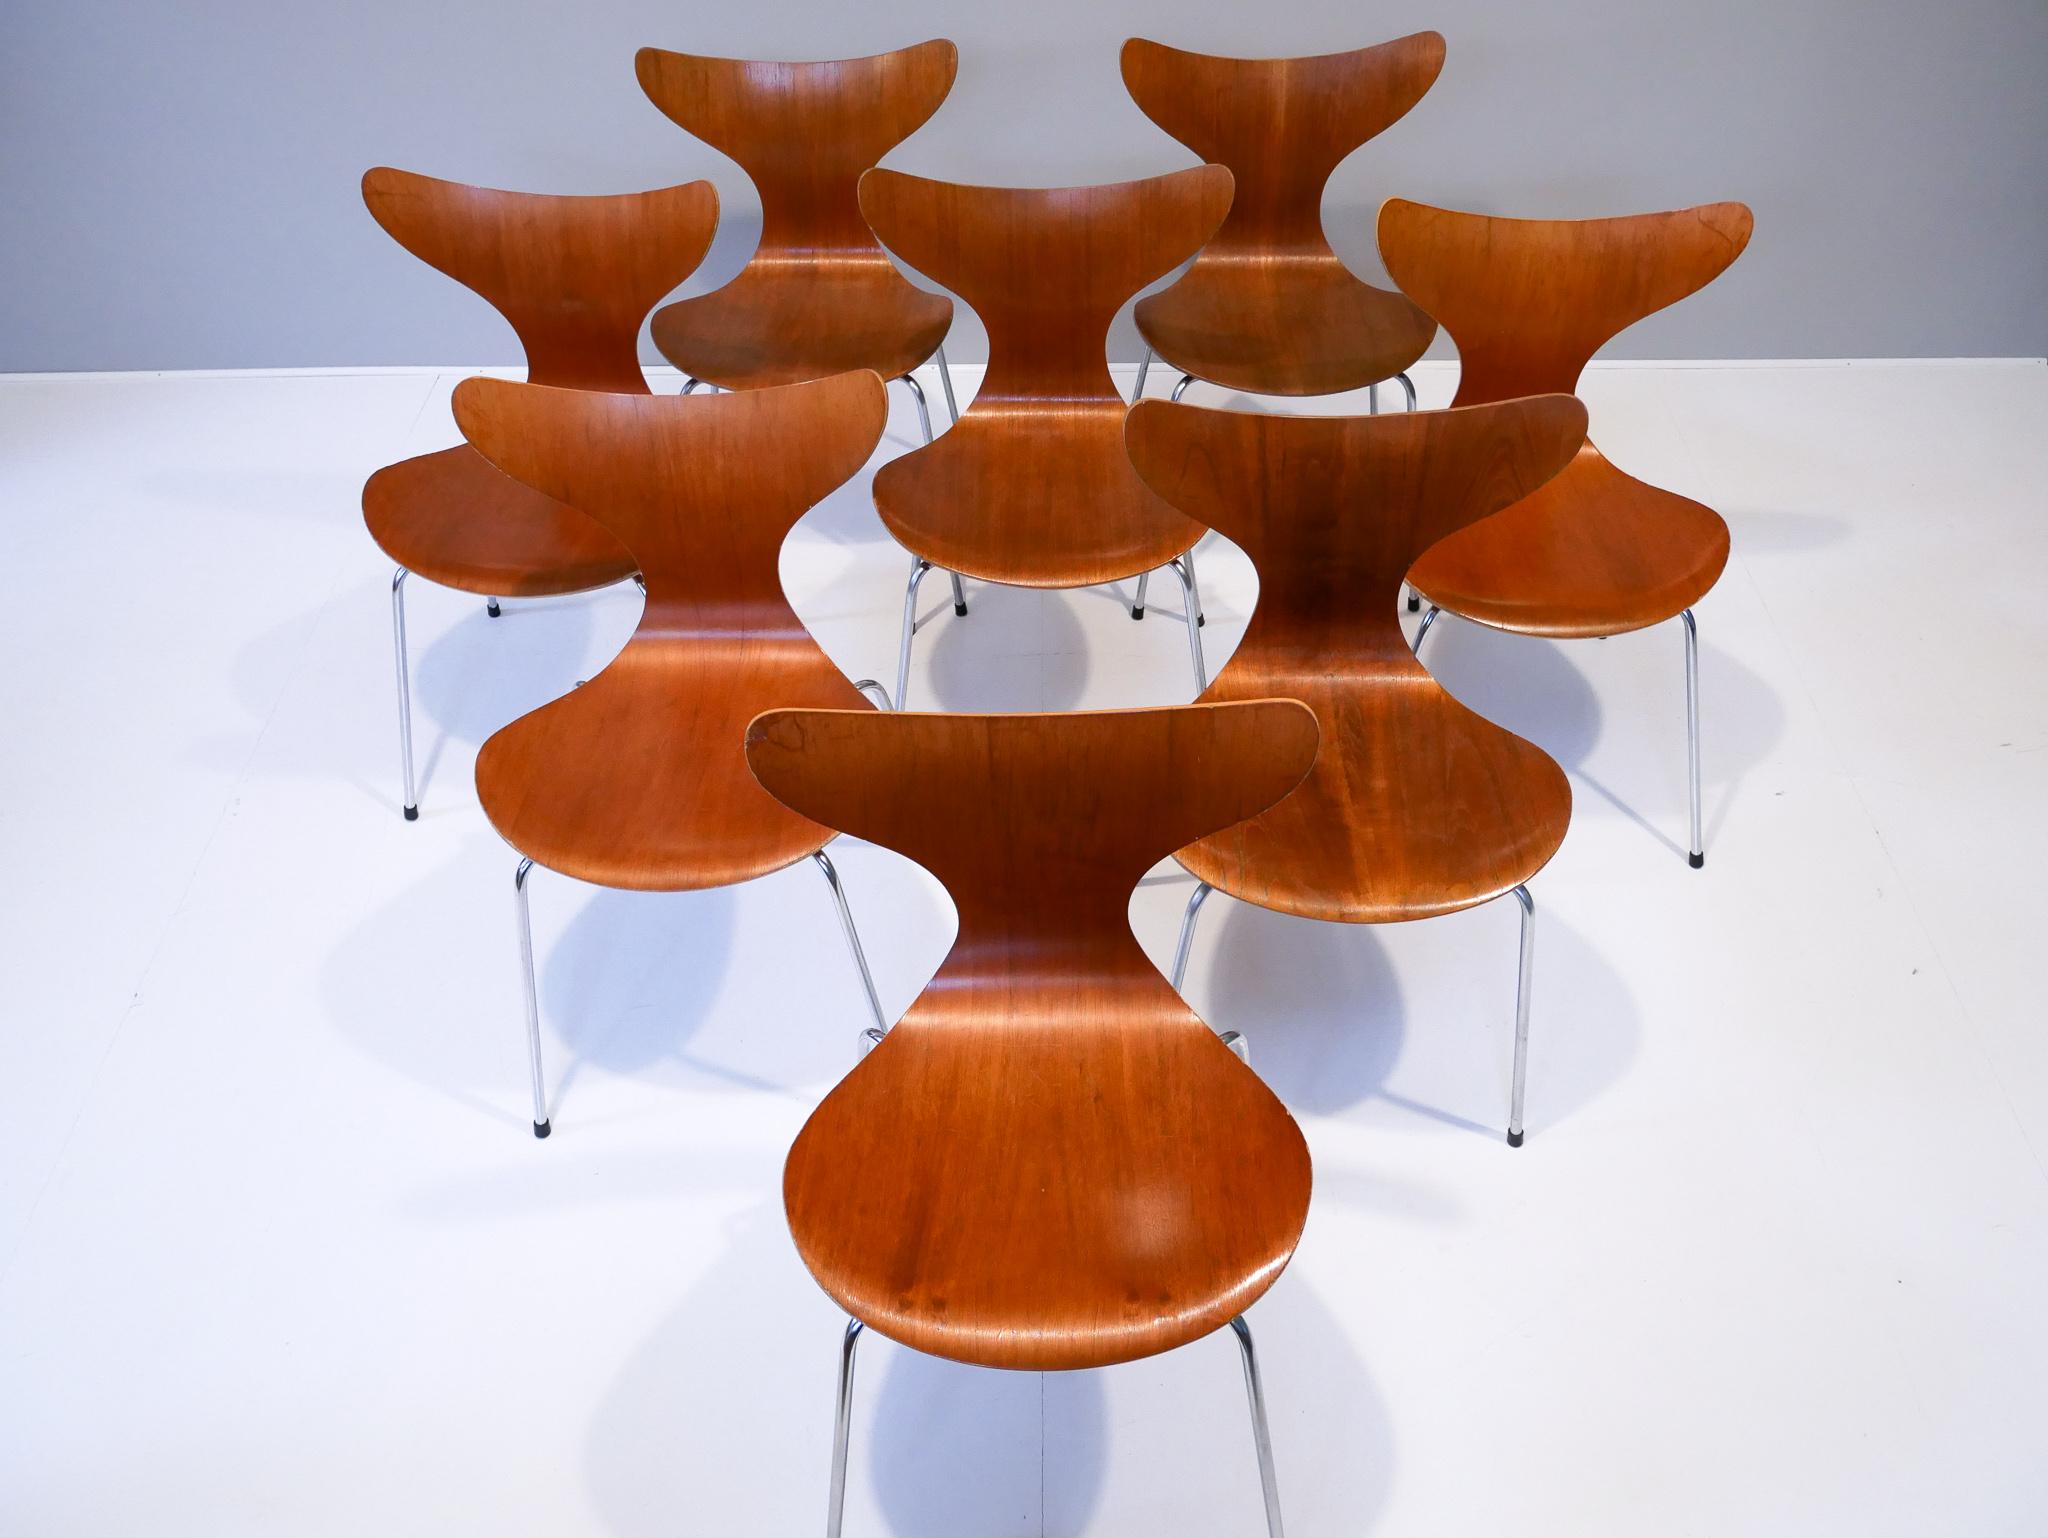 Fantastic and a very rare set of eight dining chairs model 3208 designed by Arne Jacobsen for Fritz Hansen, Denmark.

This early set is from 1972/1976 marked on the plastic cap underneath the seat, the model itself are designed 1970 and was only